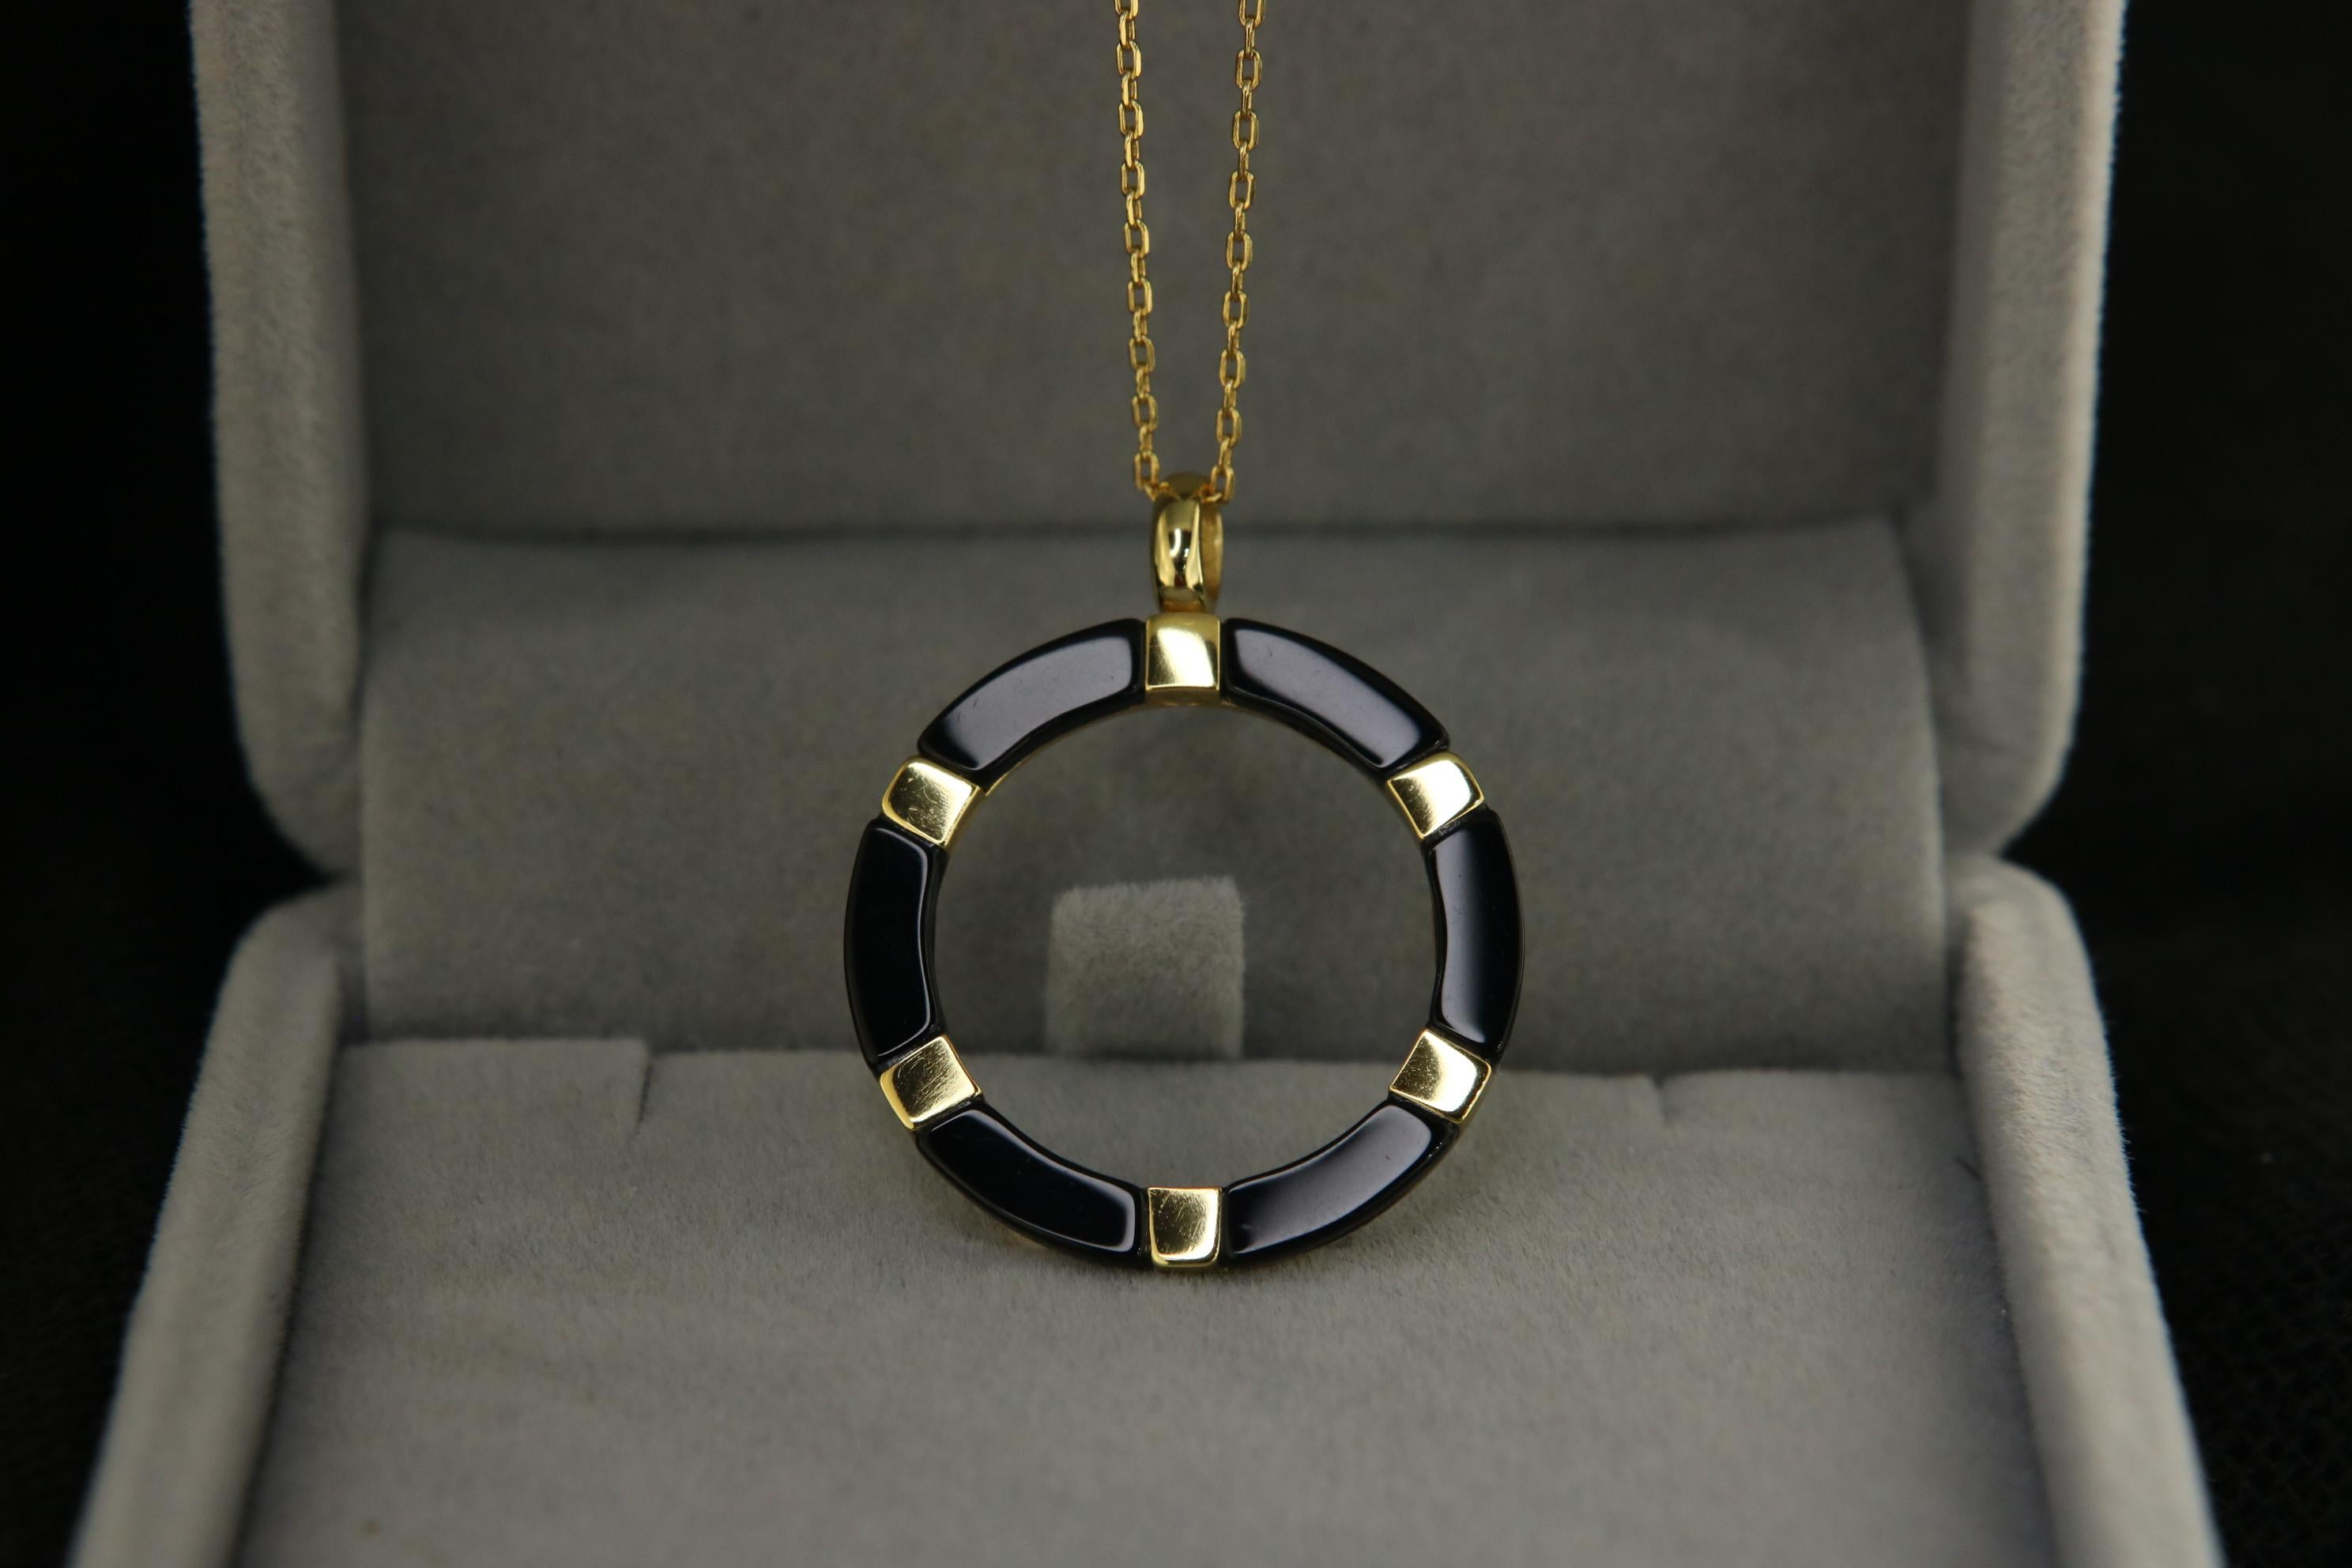 Orloff of Denmark's Aura Ringlet.

Elevate your jewelry collection with this stunning Sterling Silver Necklace, intricately designed with black enamel for a touch of modern sophistication. The pendant features a unique circular motif, alternating